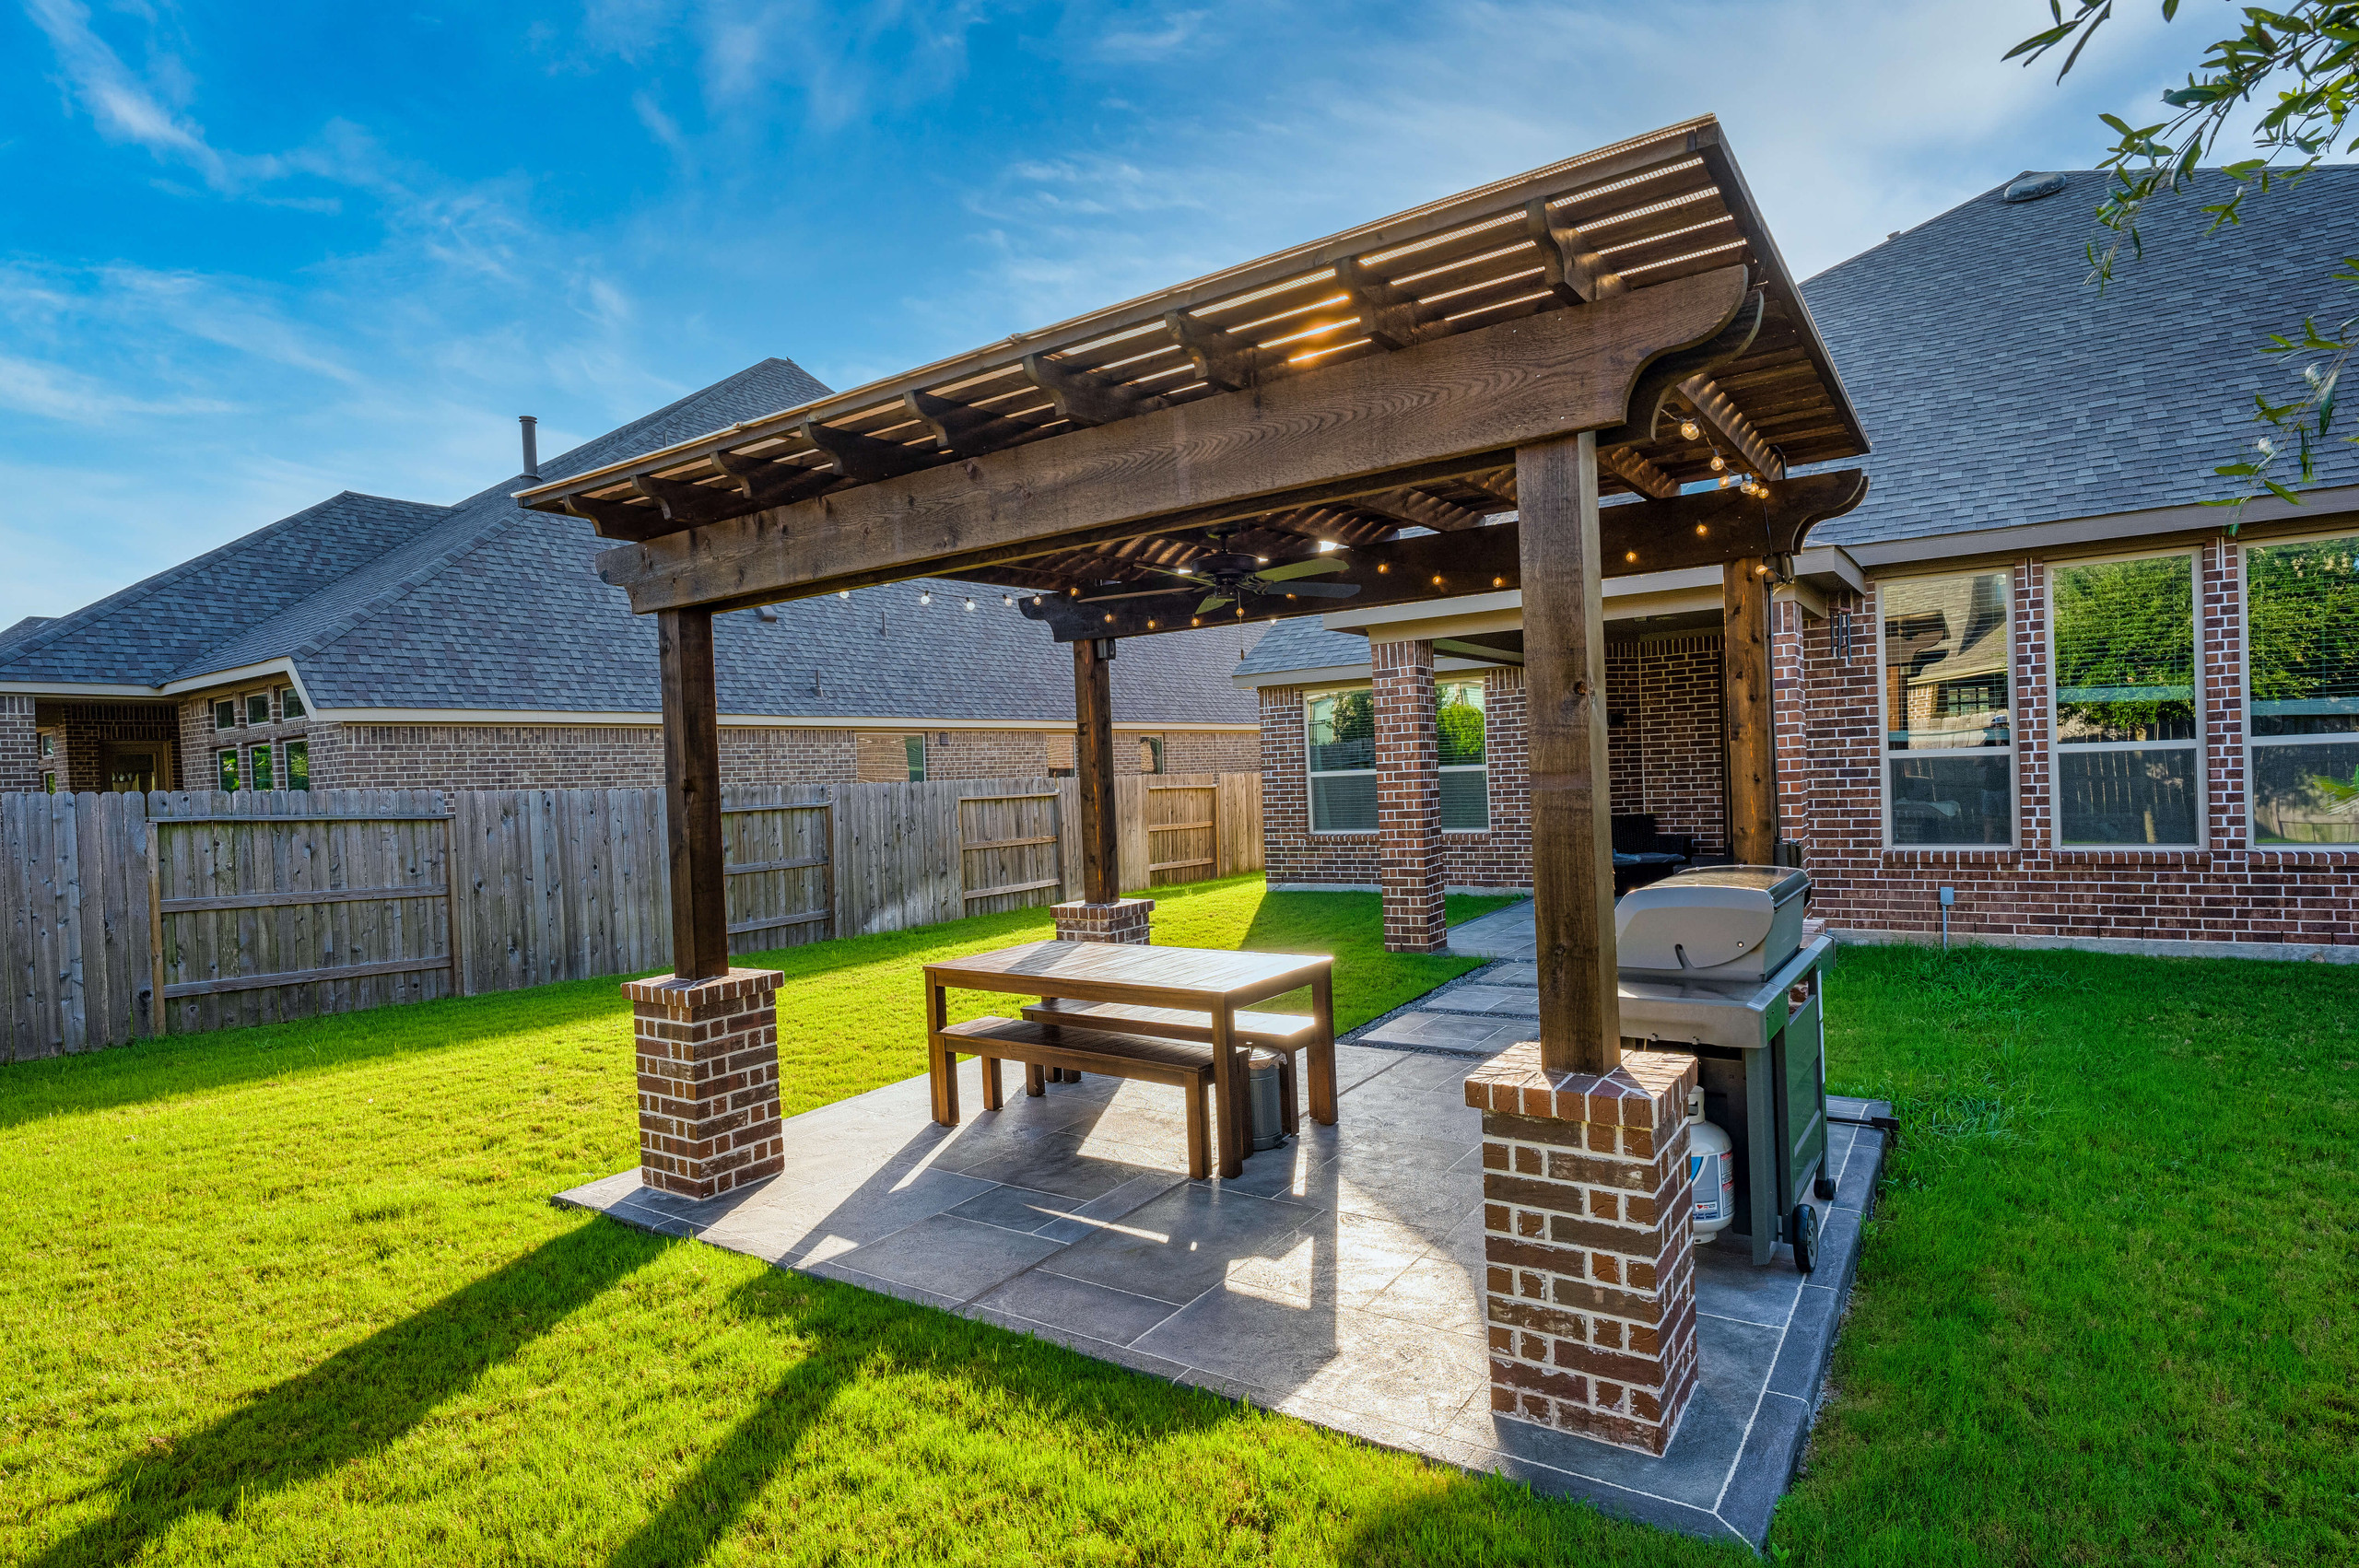 Wooden backyard pergola outdoor grill and dining space shade structure